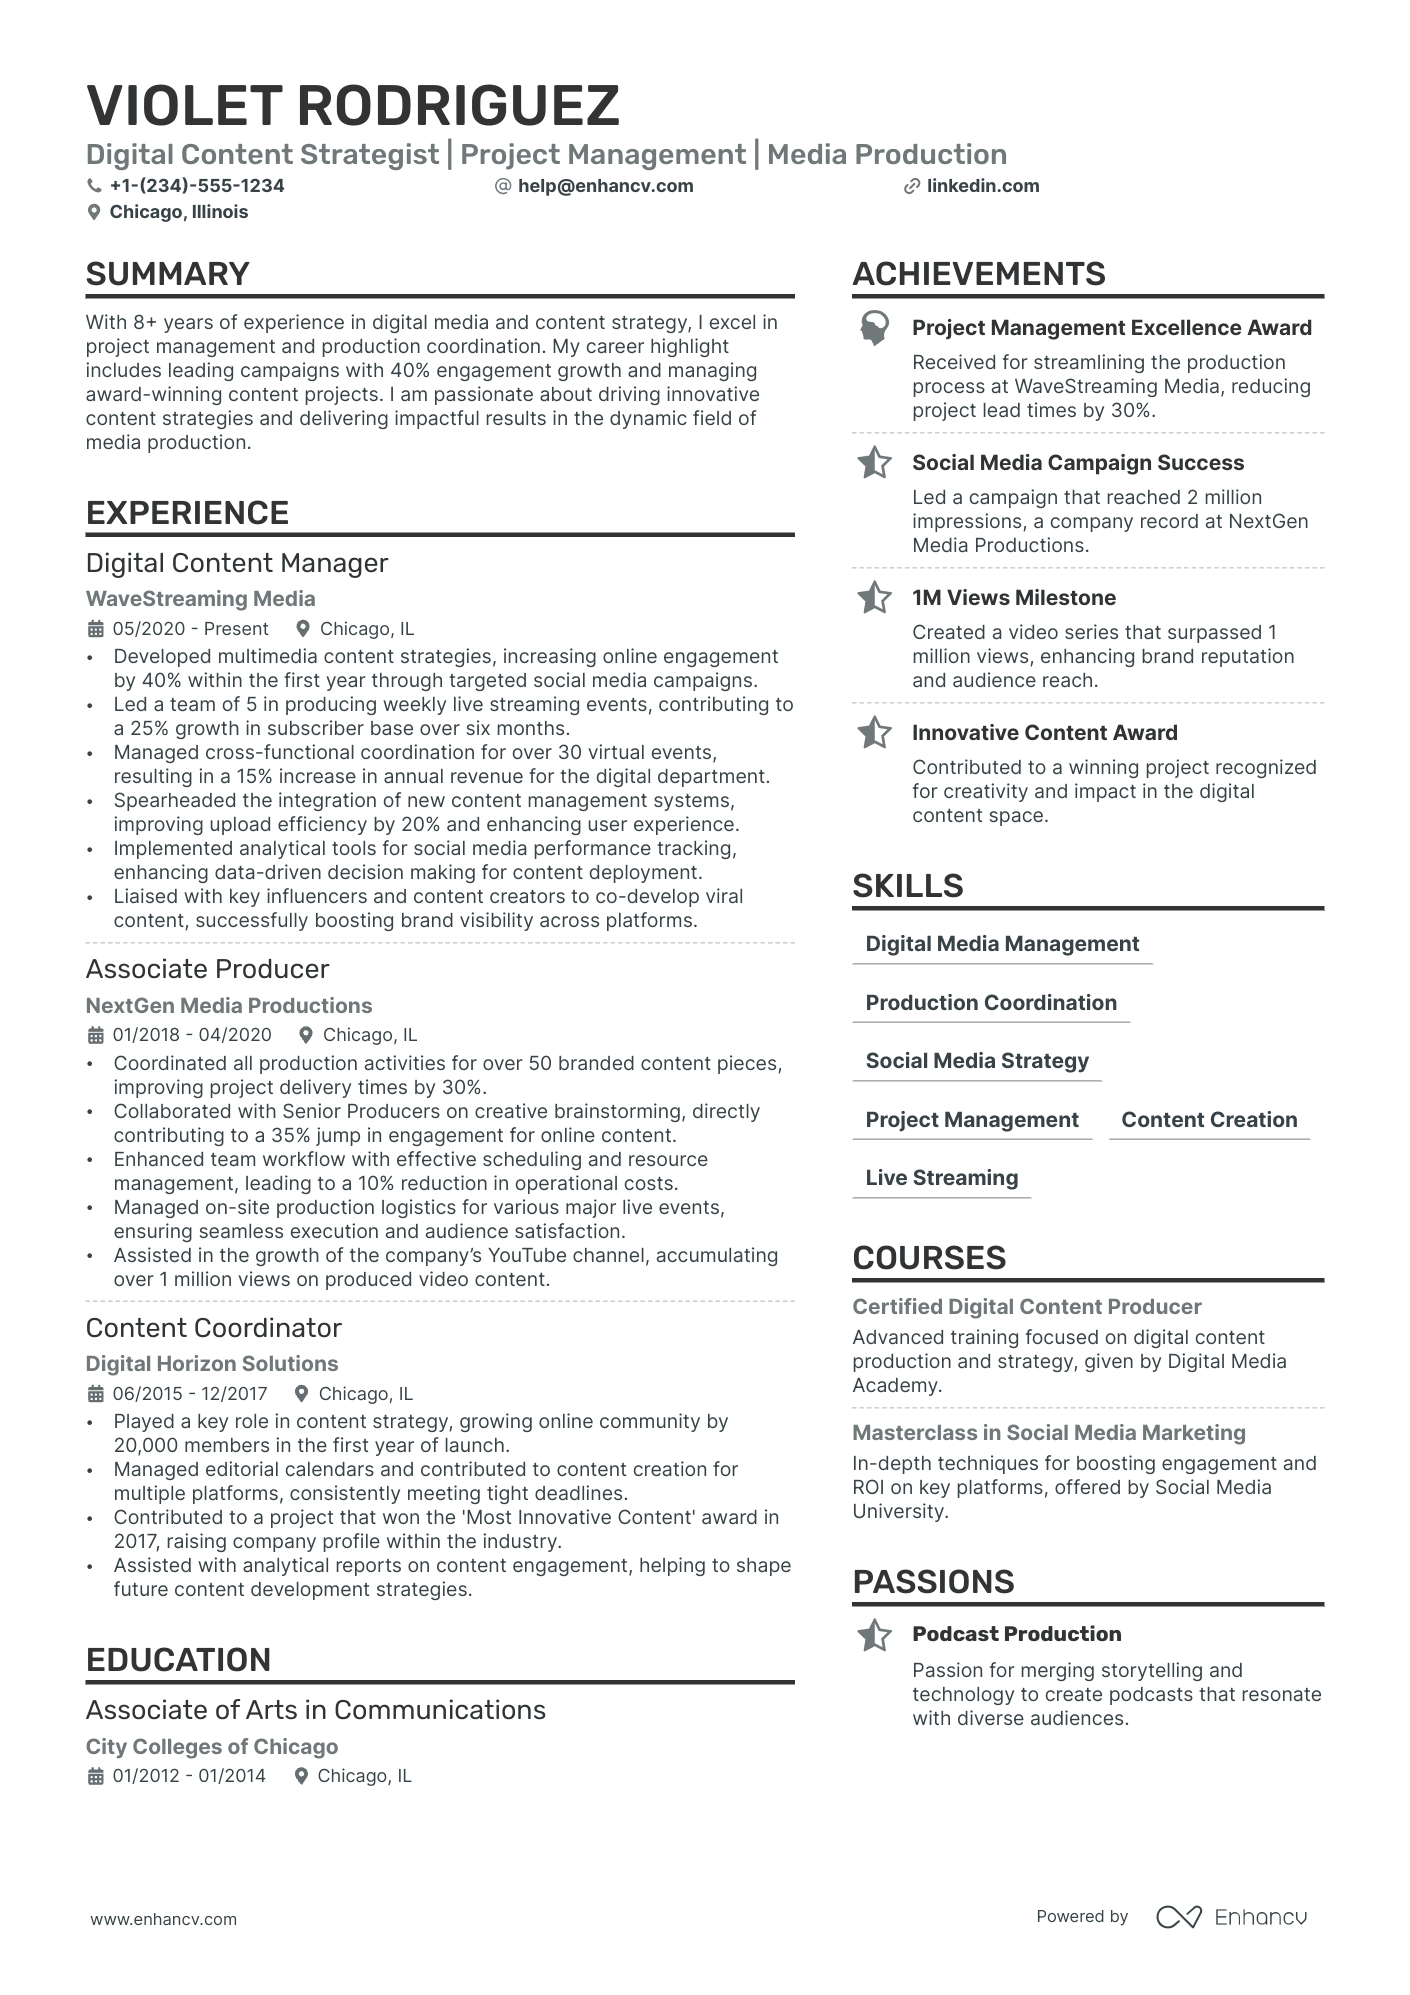 Digital Content Strategist | Project Management | Media Production resume example